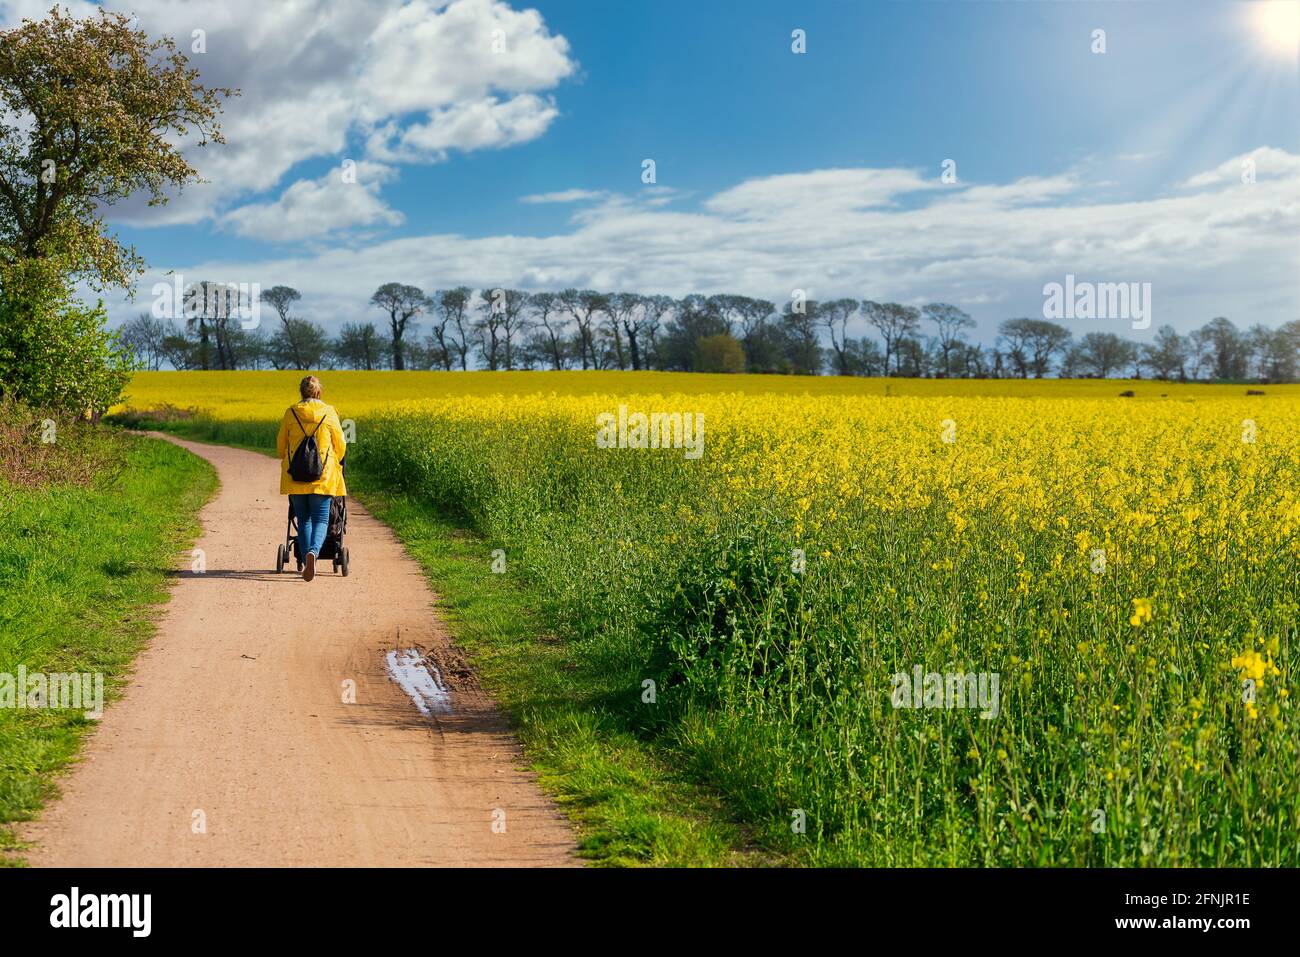 rear view of woman in yellow raincoat pushing a baby stroller down a path next to a canola field Stock Photo